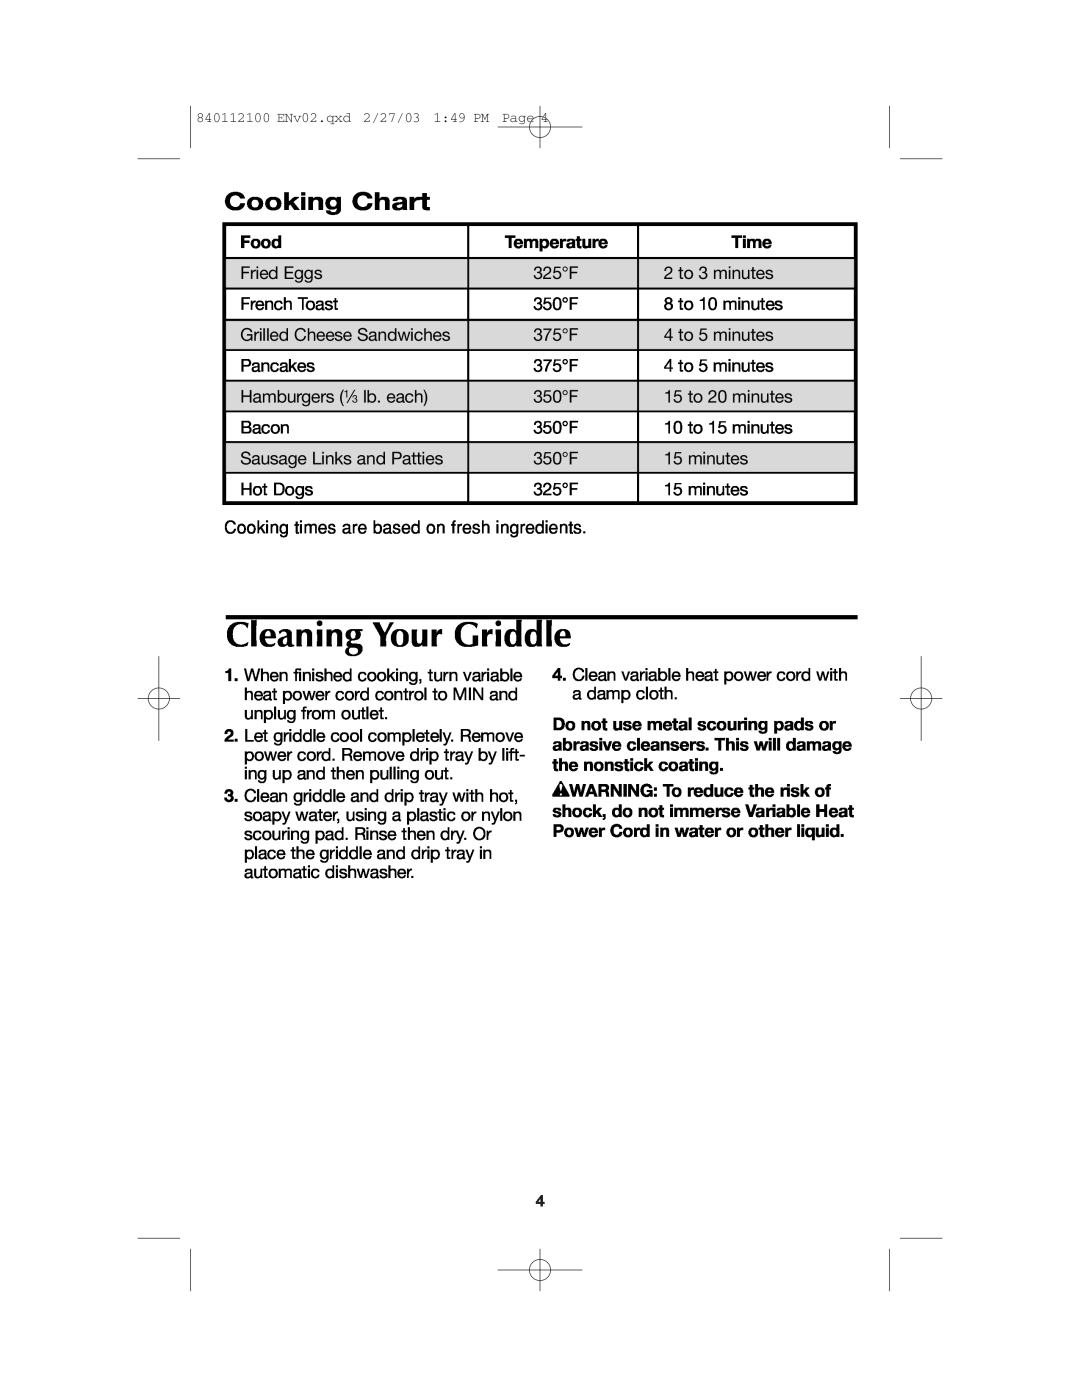 Proctor-Silex 840112100 manual Cleaning Your Griddle, Cooking Chart, Food, Temperature, Time 